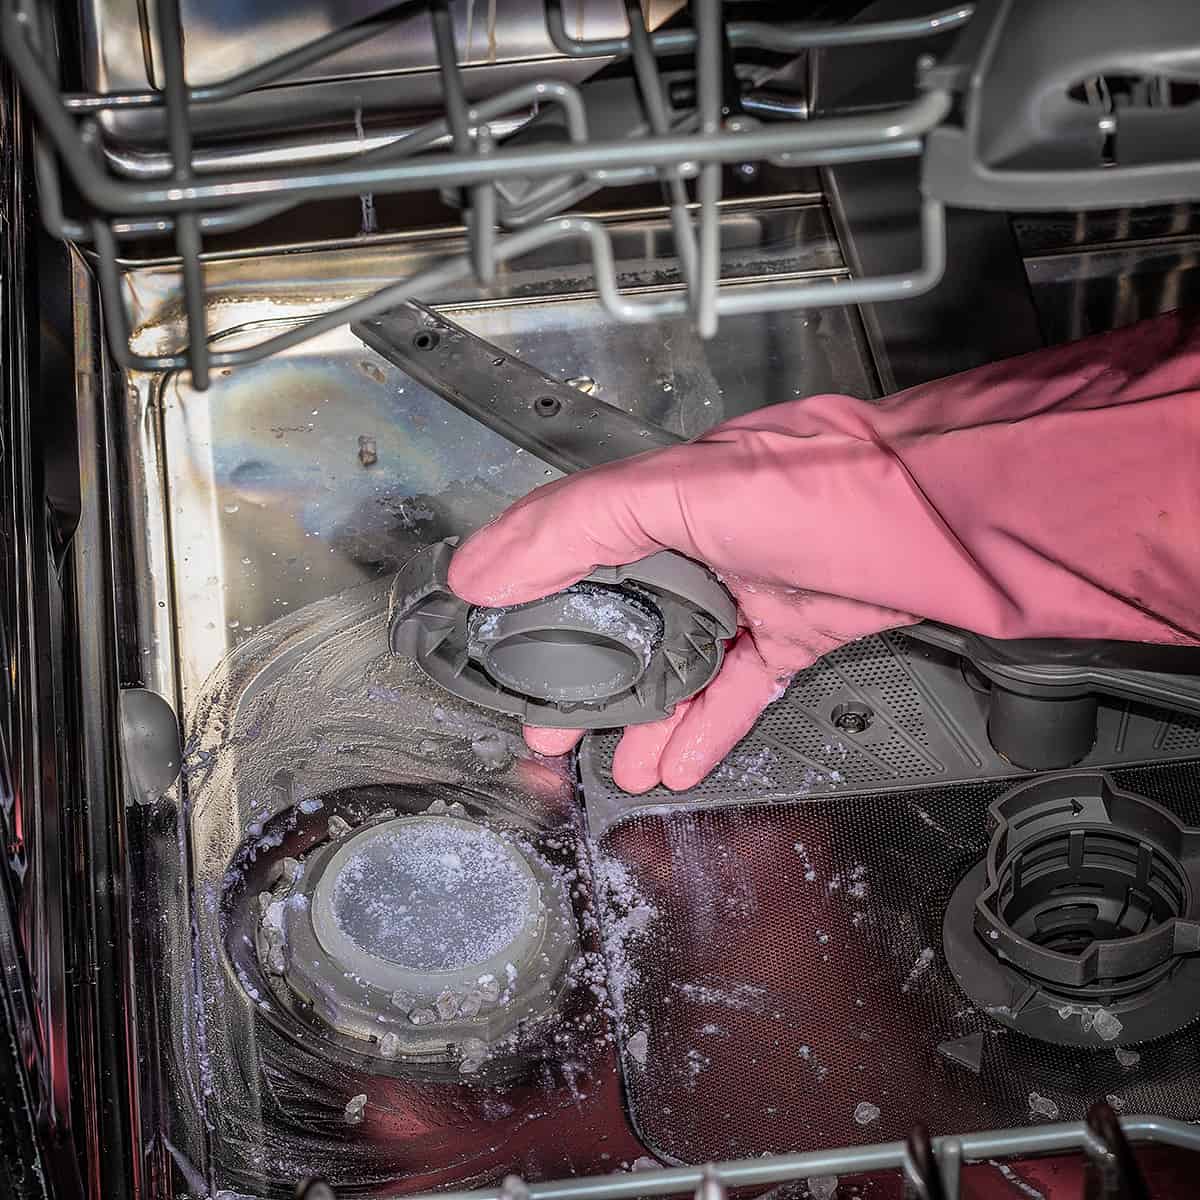 How Do Dishwashers Become Clogged